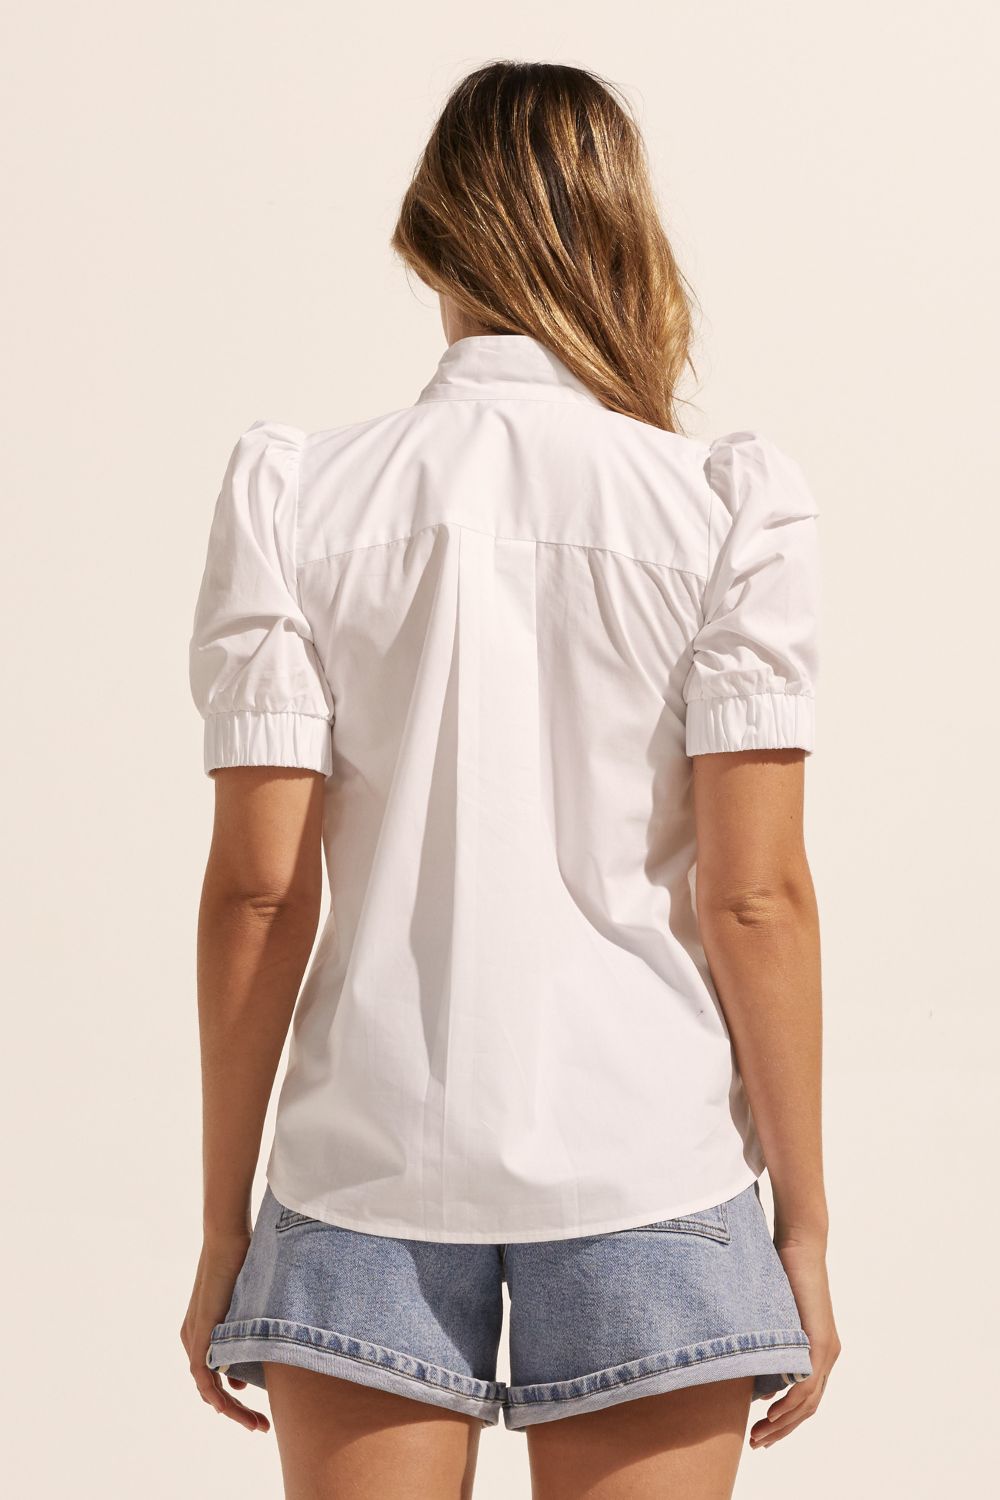 white, high neck, button up shirt, top, back view